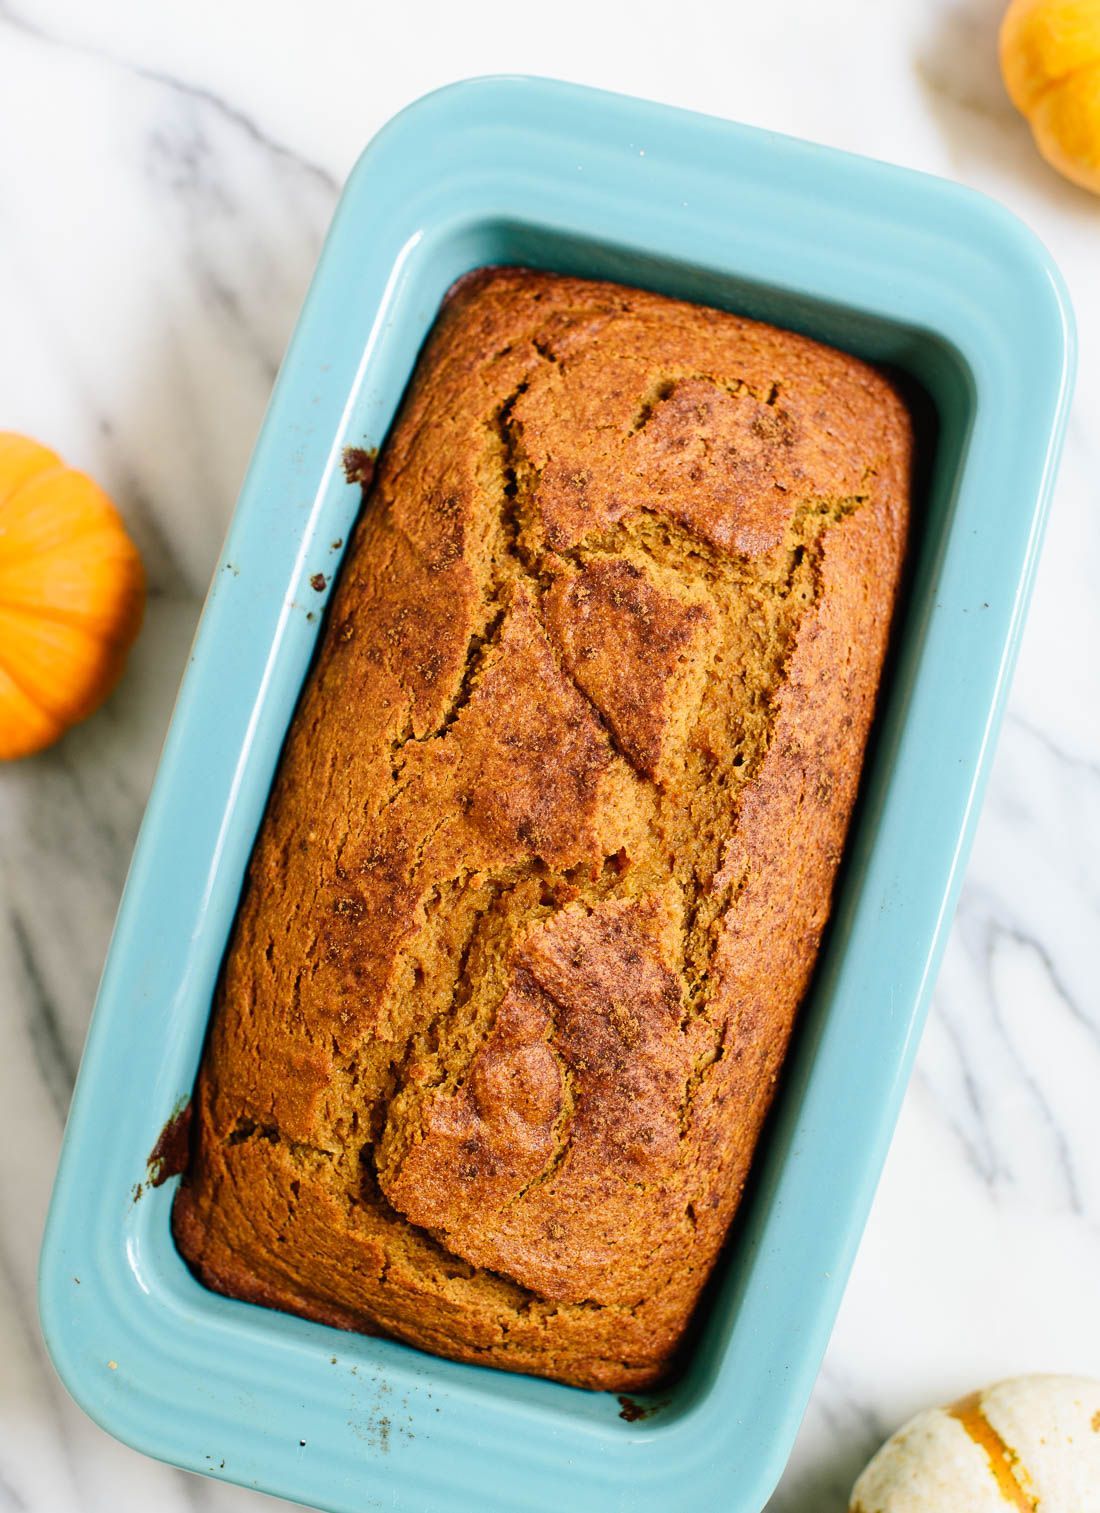 Healthy, naturally sweetened pumpkin bread made with coconut oil and whole wheat flour! It’s my favorite. cookieandkate.com